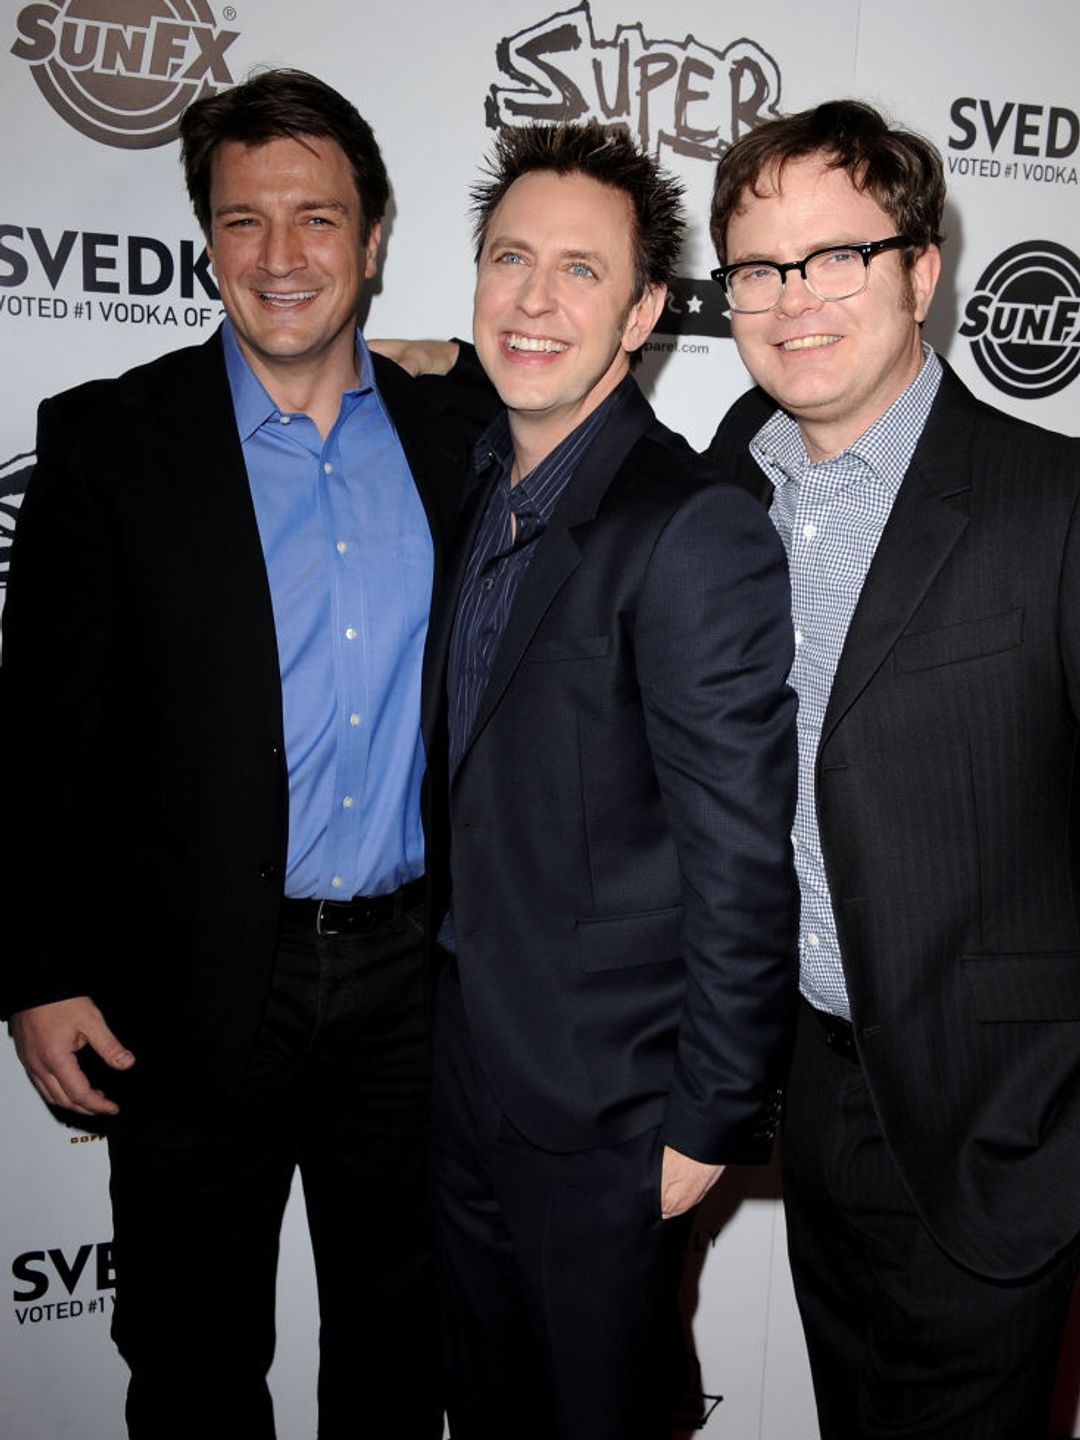 Actor Nathan Fillion, writer/director James Gunn and actor Rainn Wilson attend the premiere of Super in Los Angeles